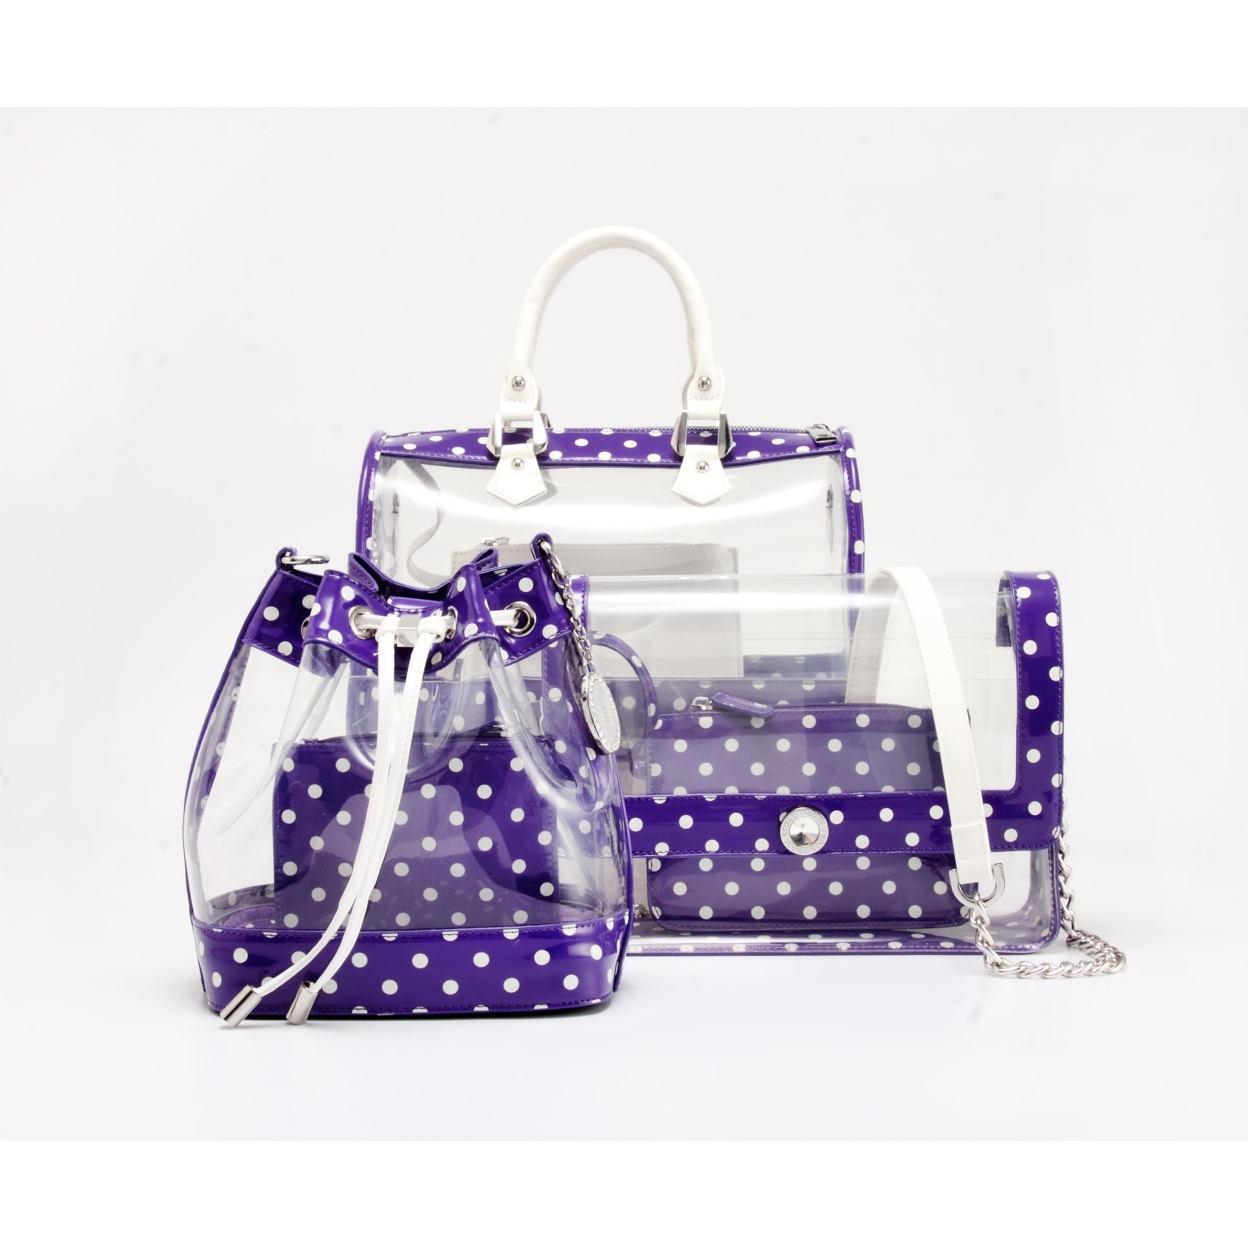 SCORE! Andrea Large Clear Designer Tote For School, Work, Travel - Royal Purple And White